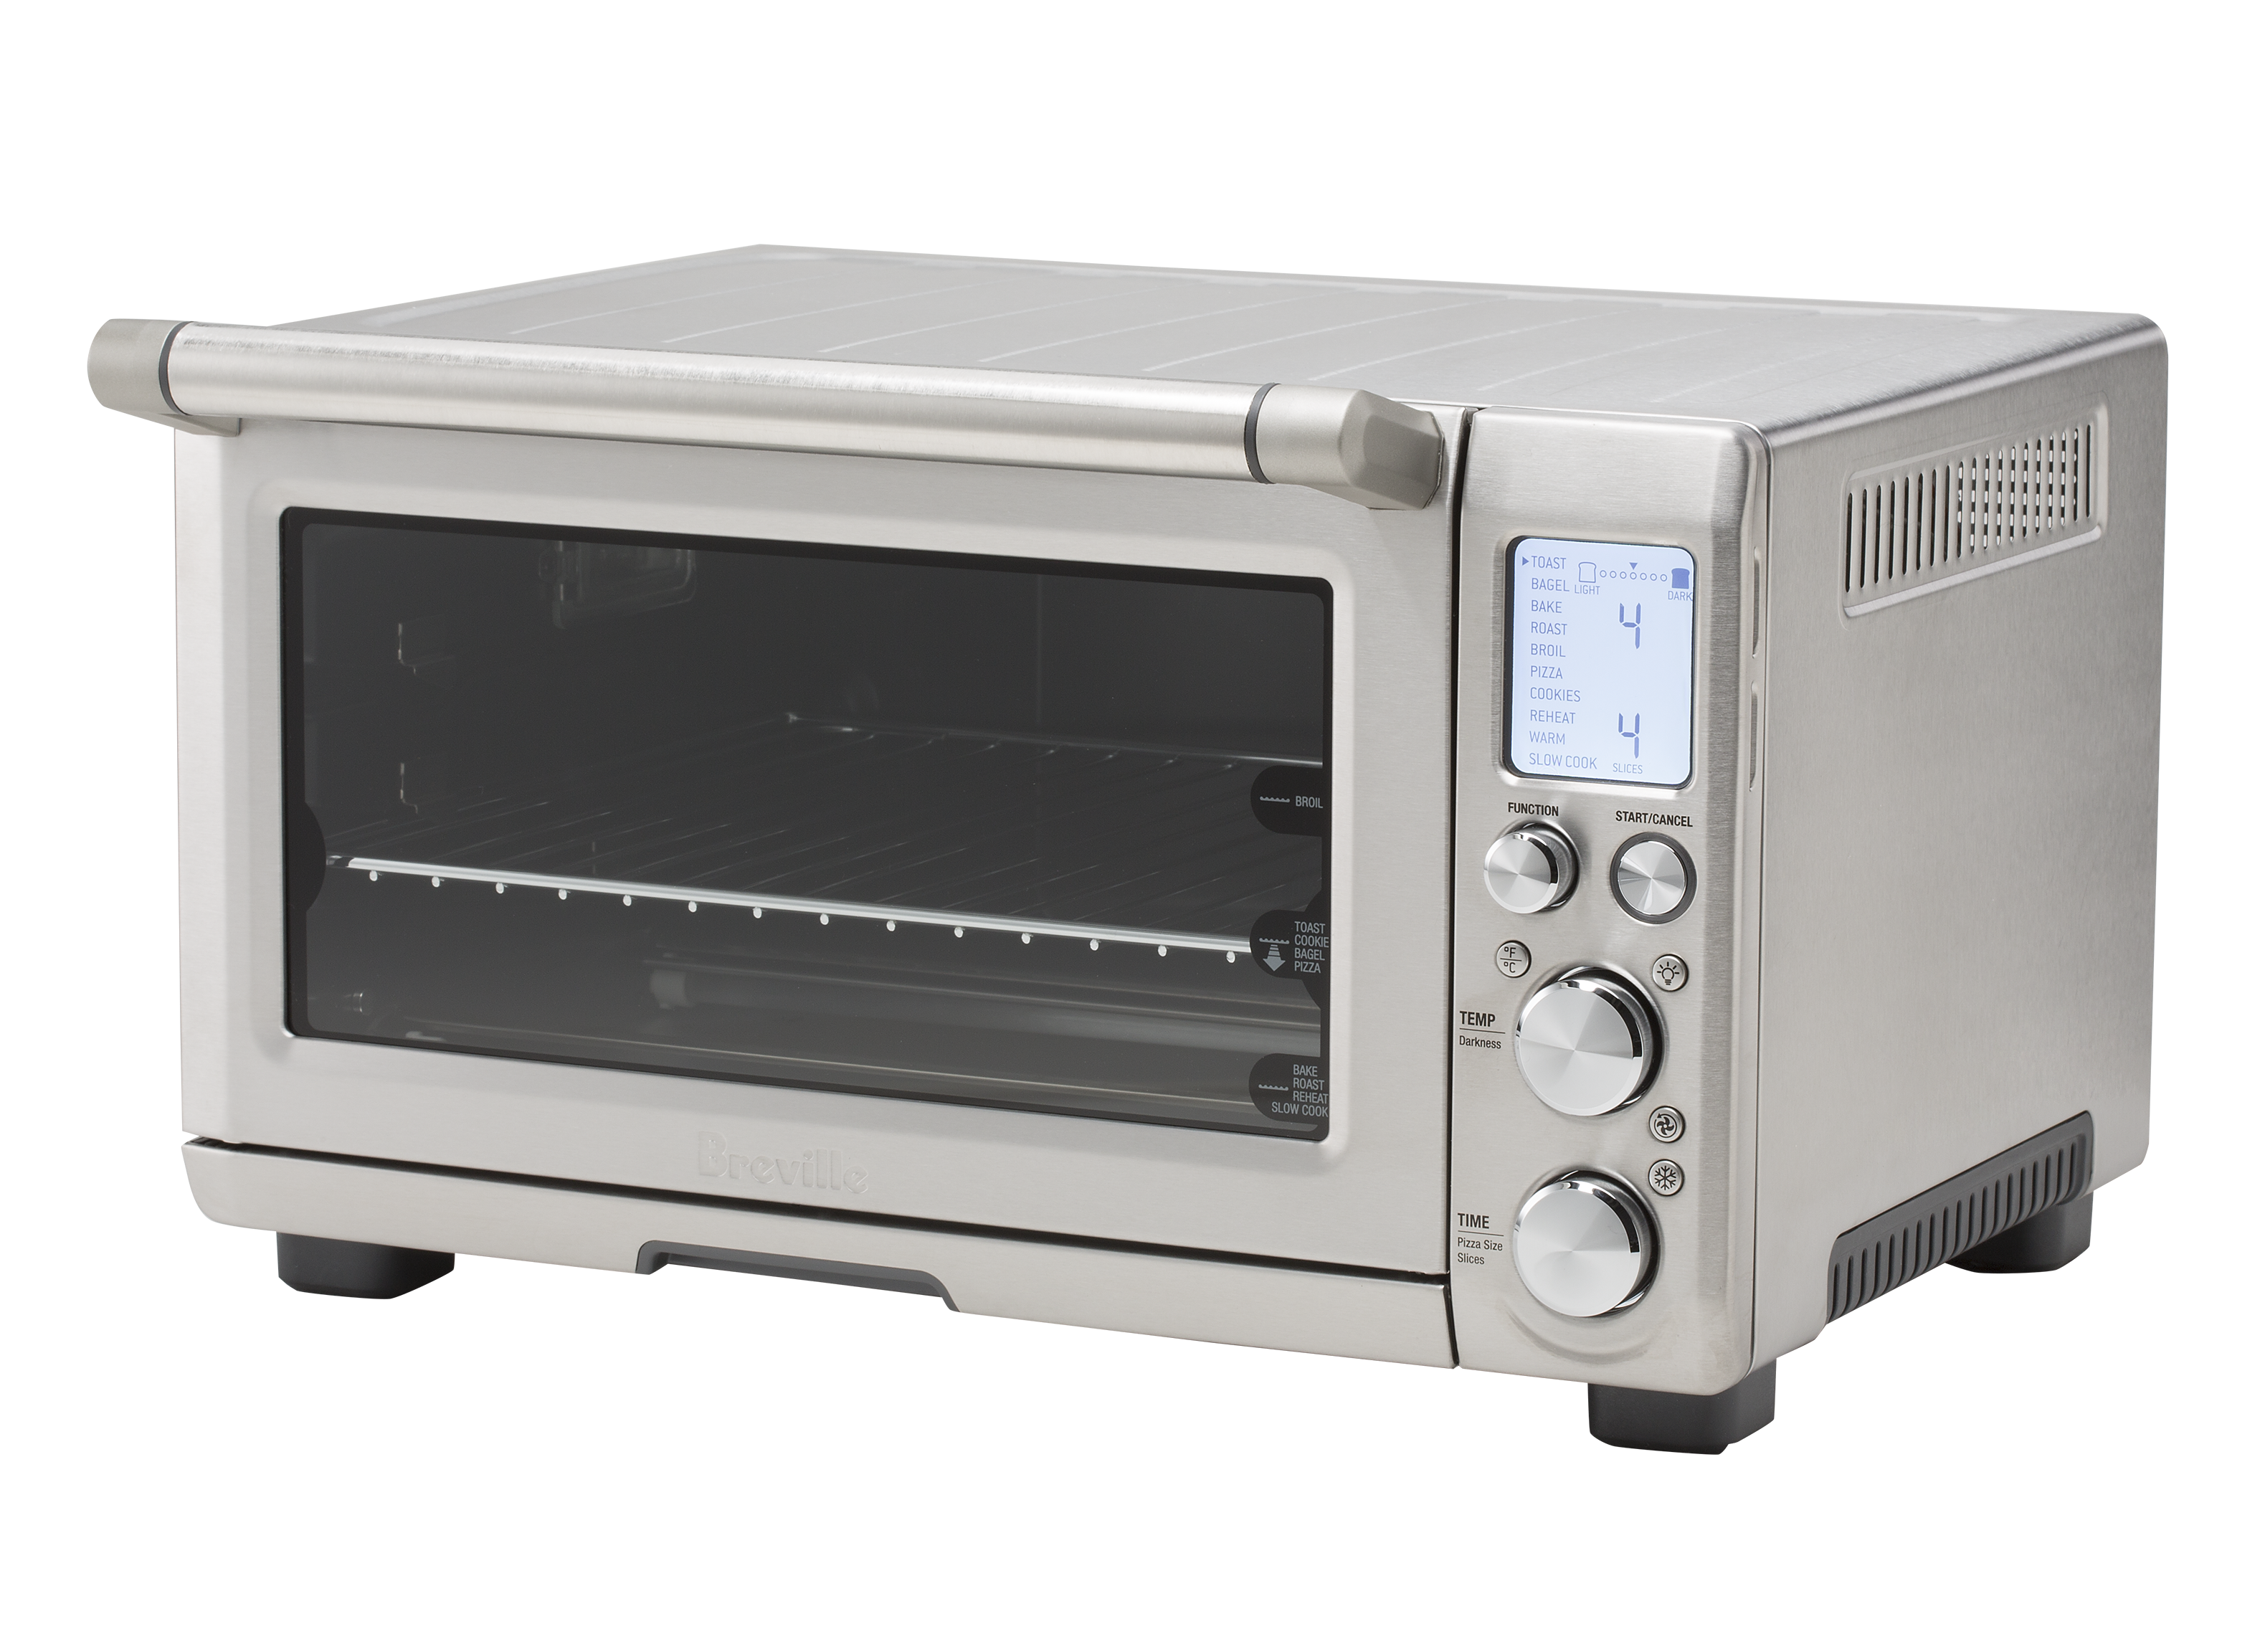 Breville The Smart Oven Pro BOV845BSS Toaster & Toaster Oven Review -  Consumer Reports